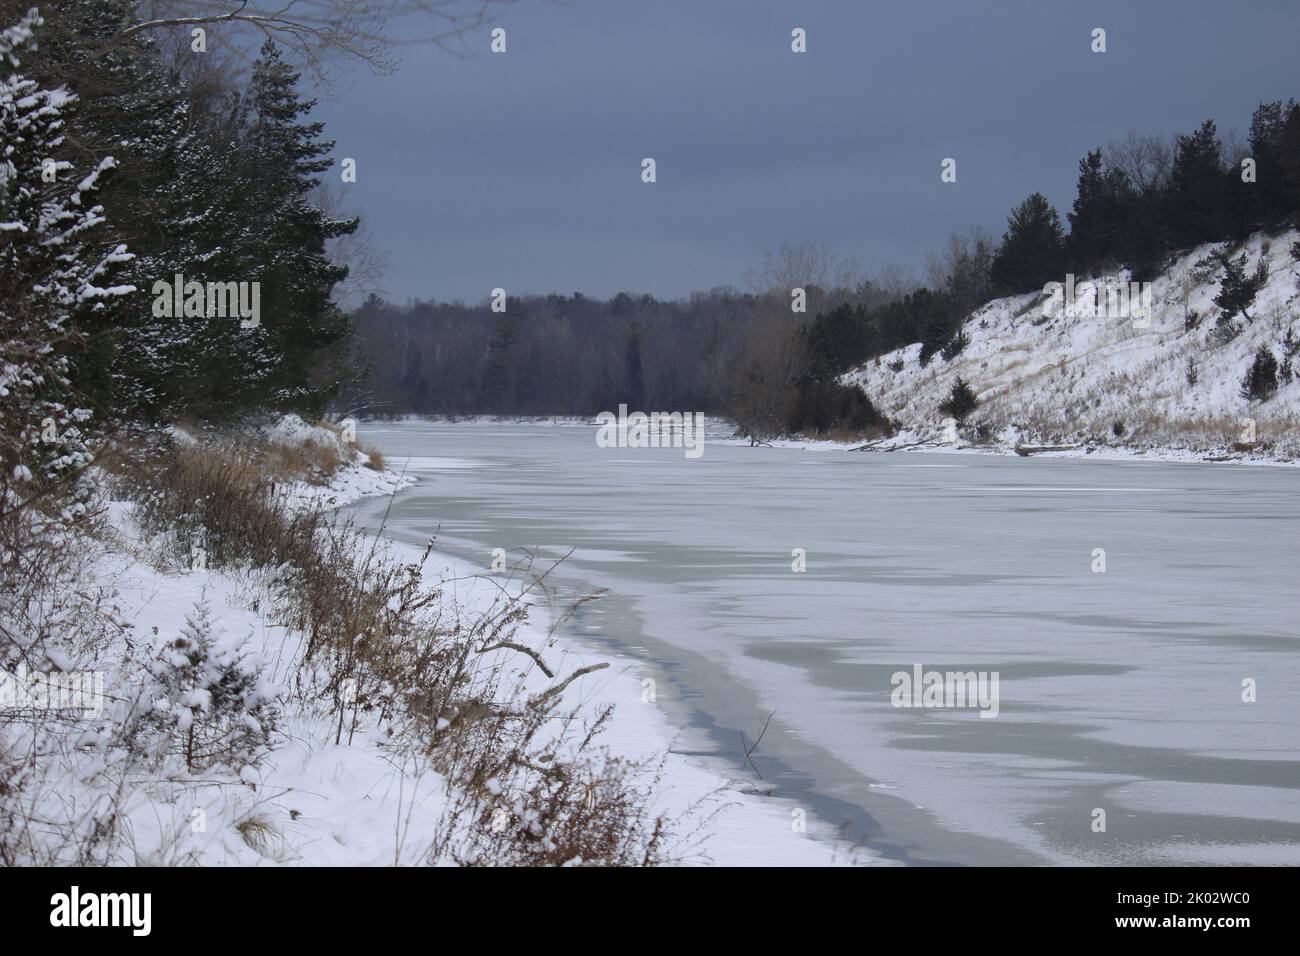 A frozen lake during winter in Southern Ontario, Canada Stock Photo